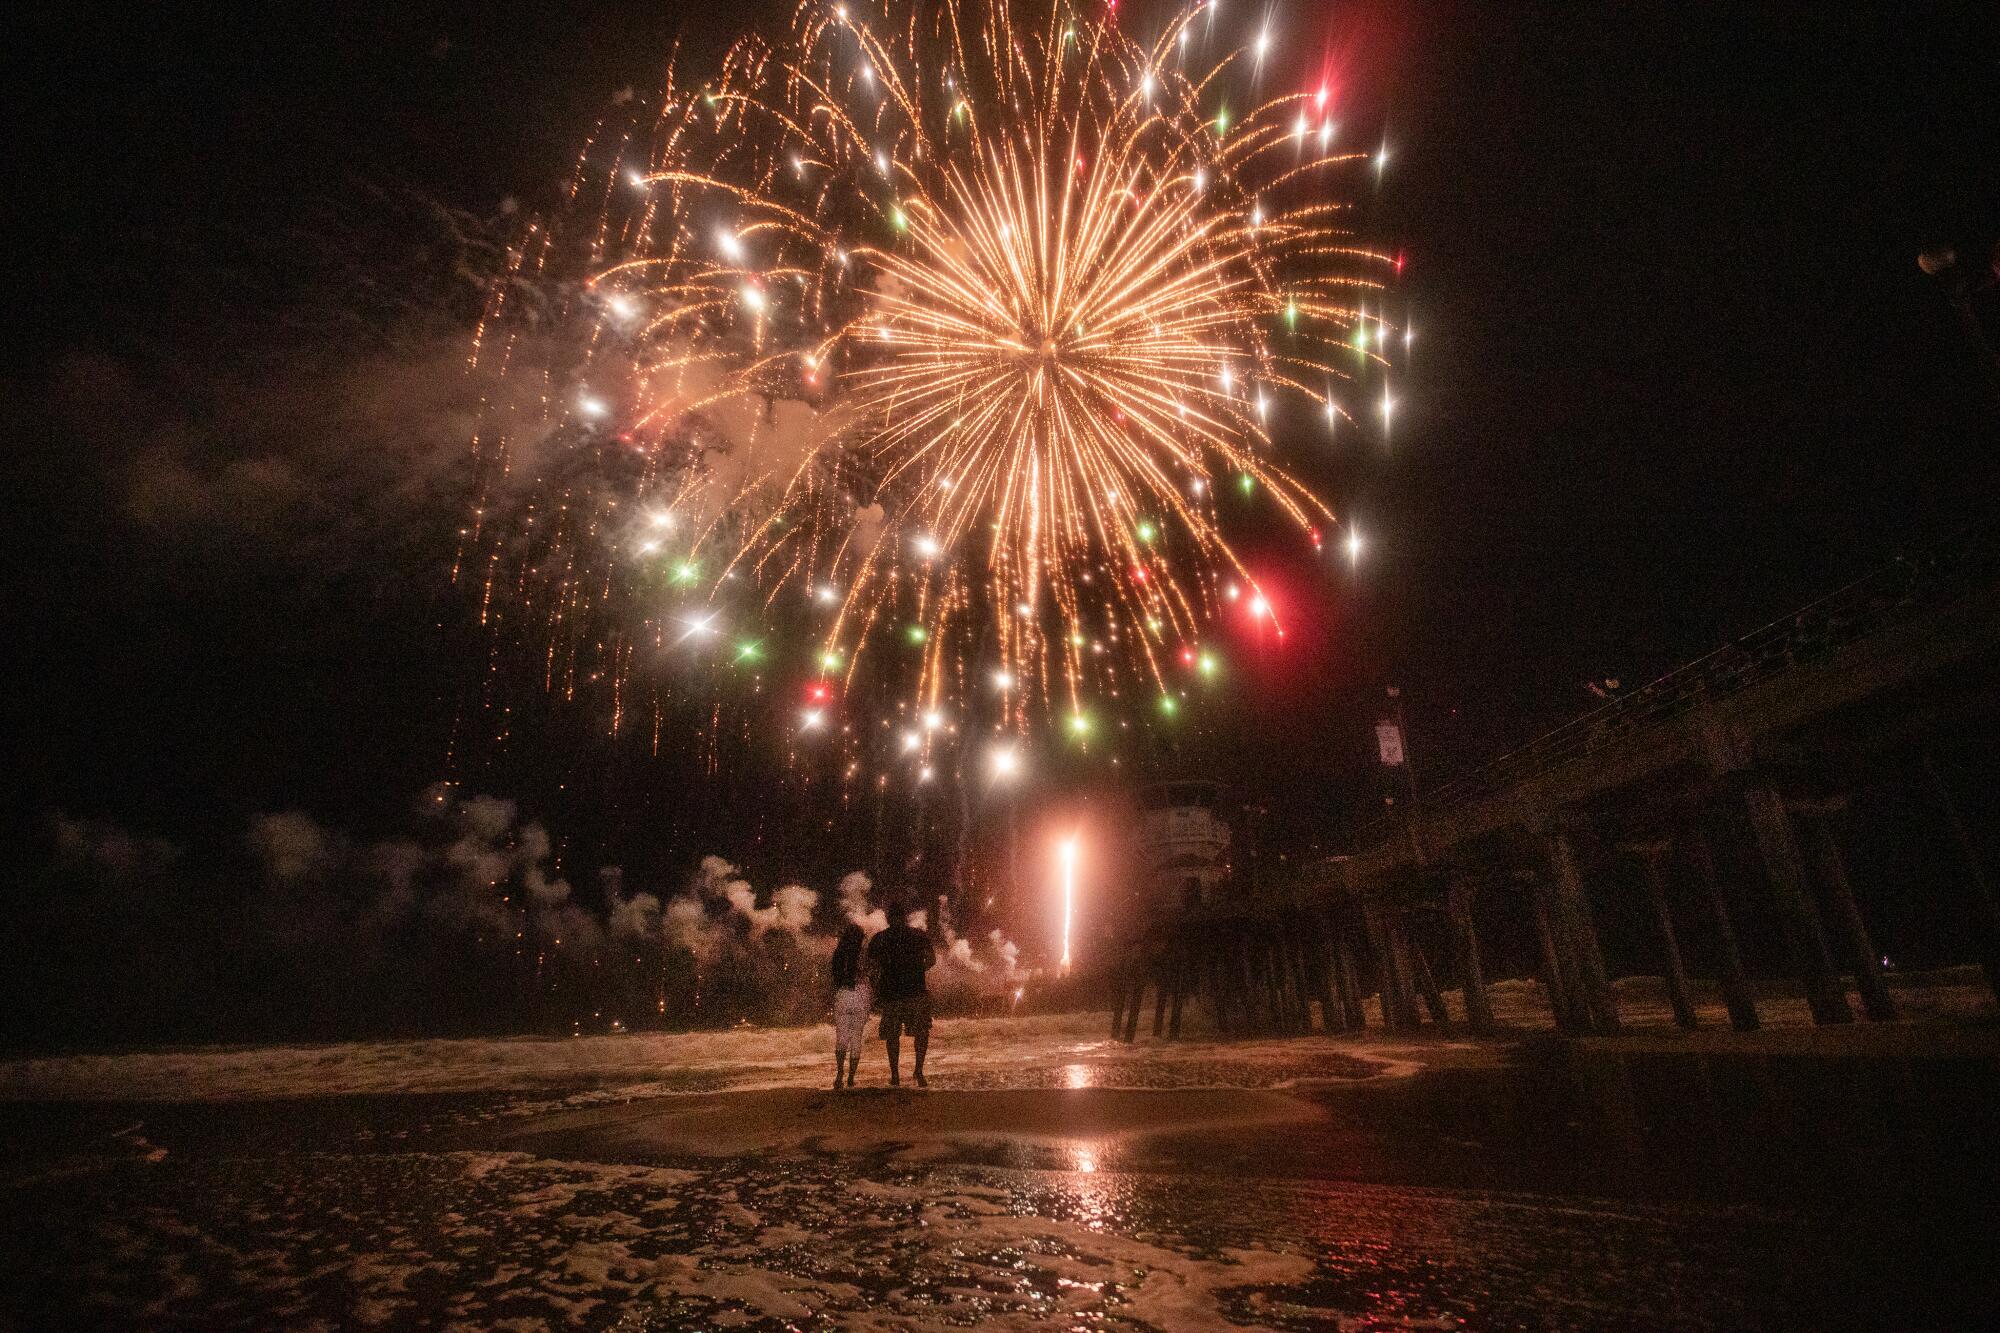 A couple wades into the ocean during the fireworks show.